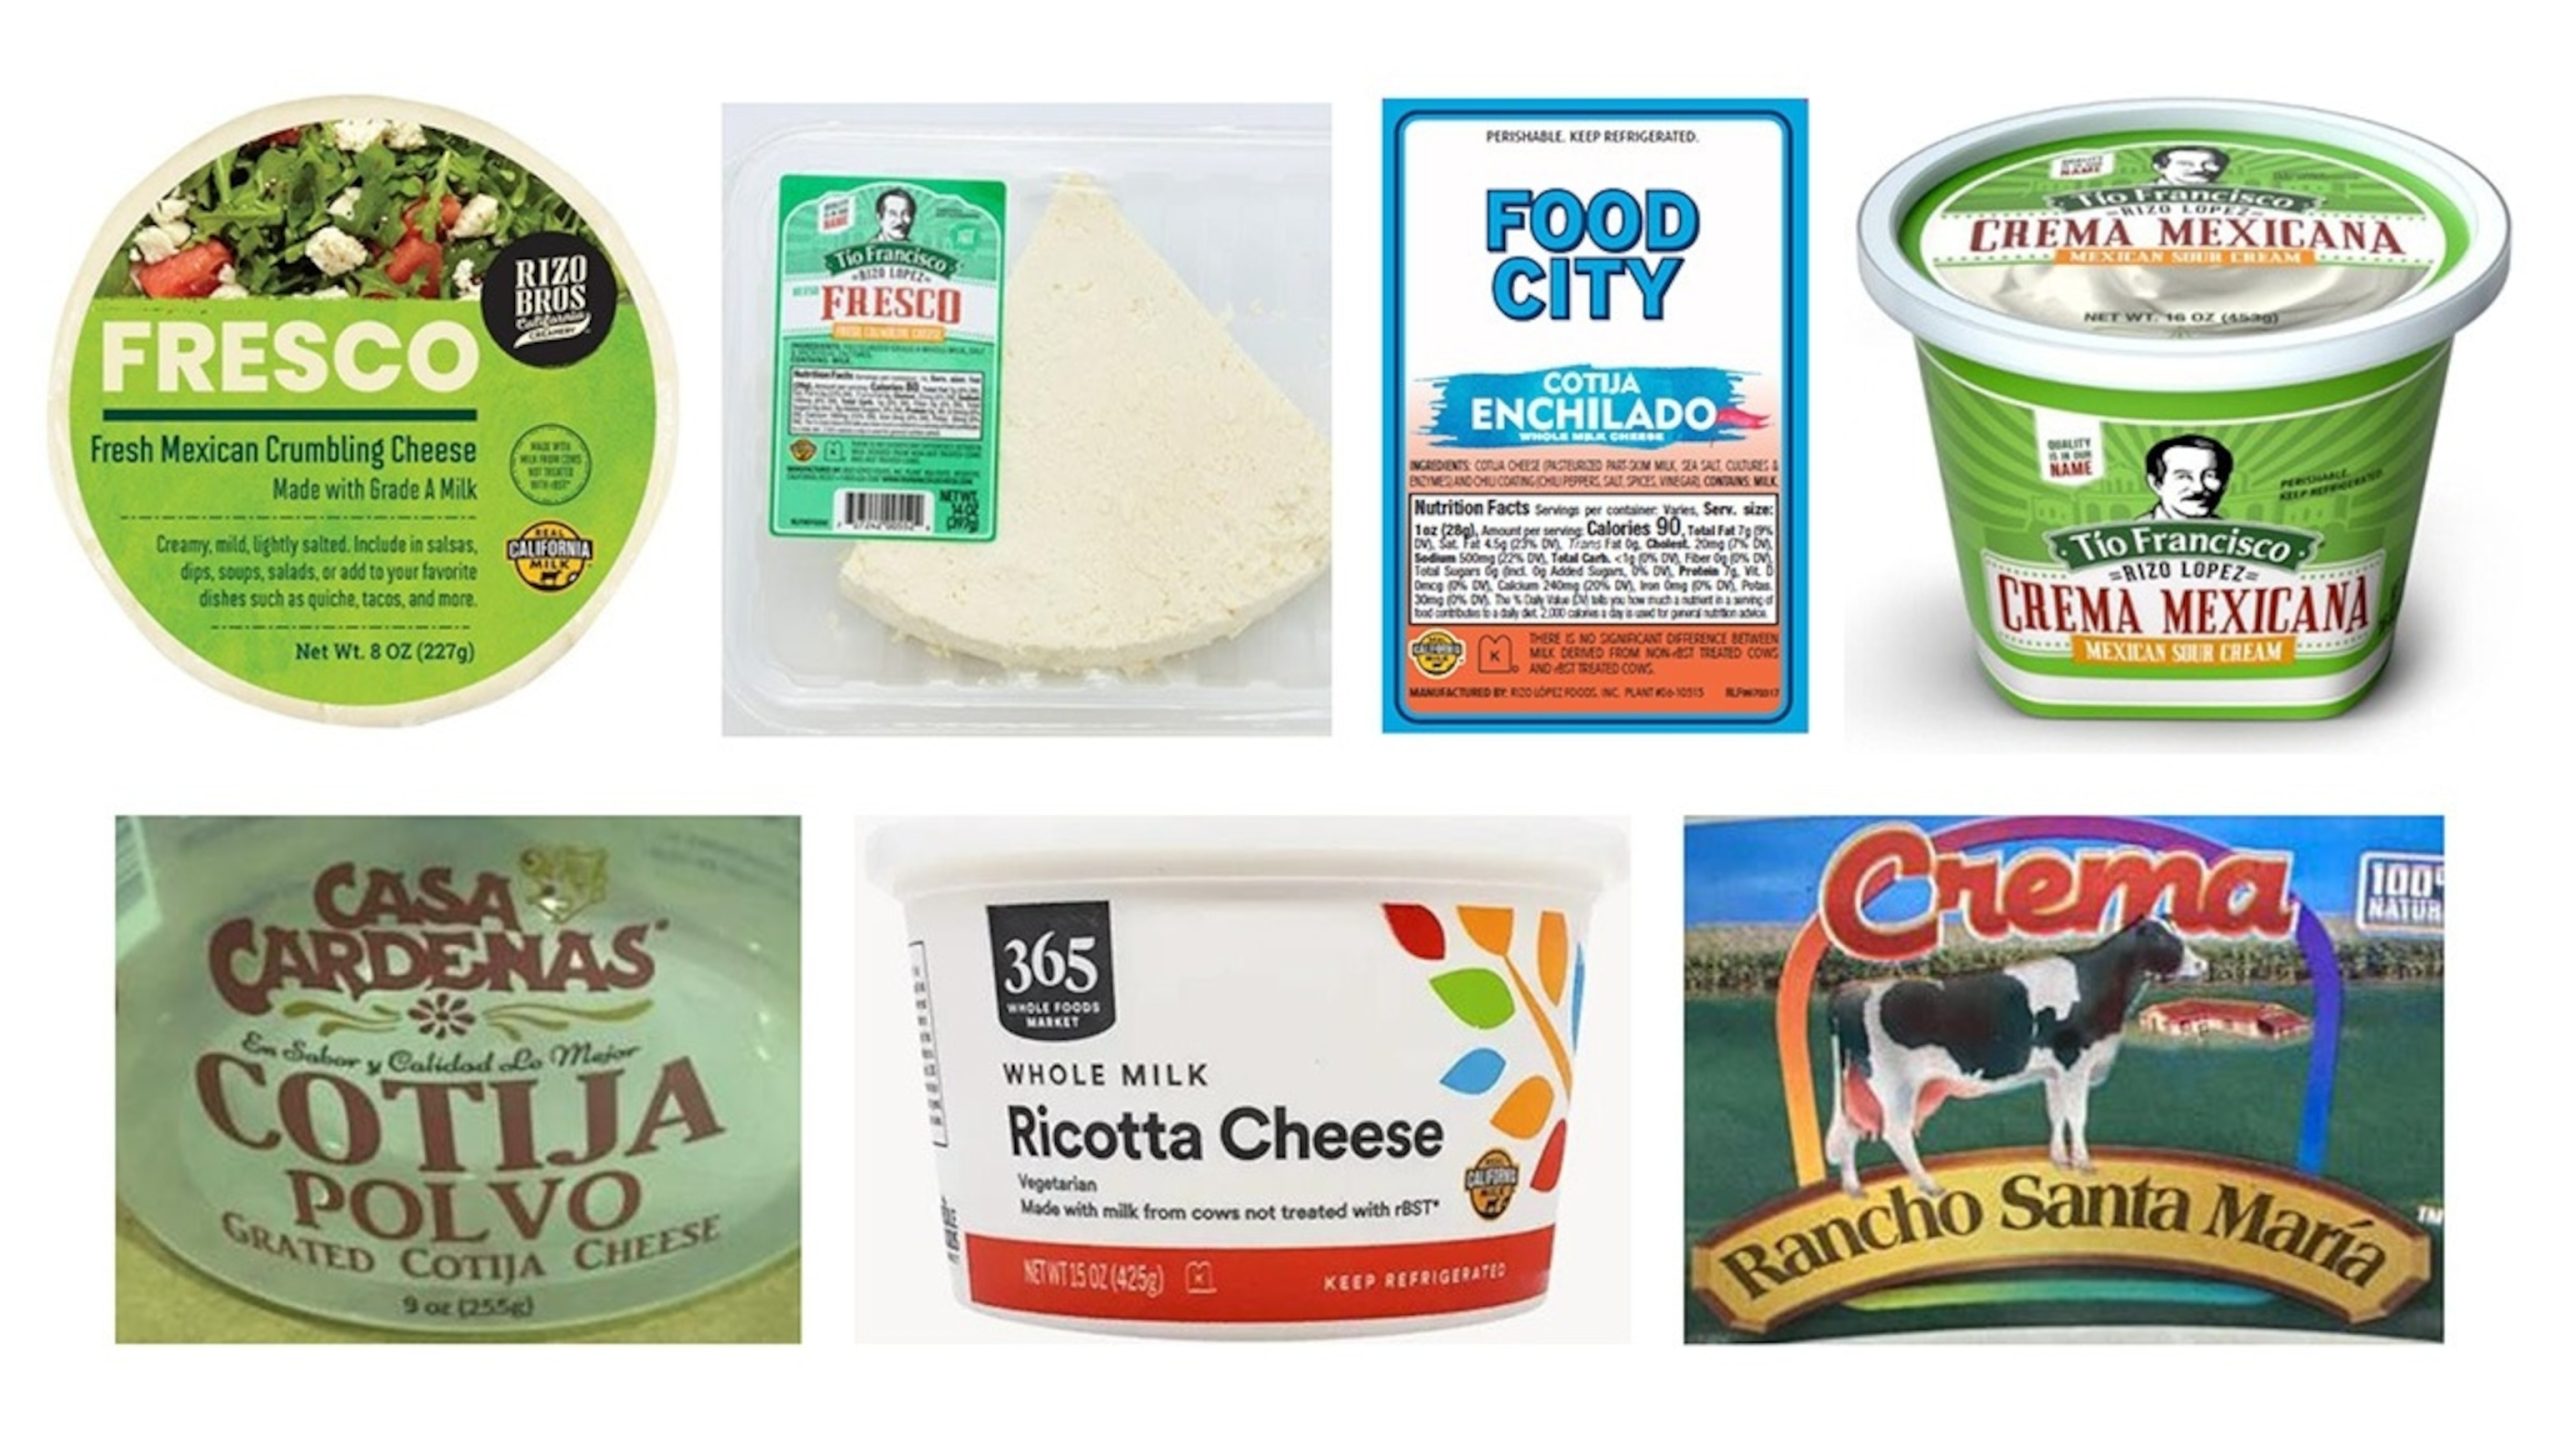 CDC warns that recalled dairy products may be connected to listeria outbreak in 7 states